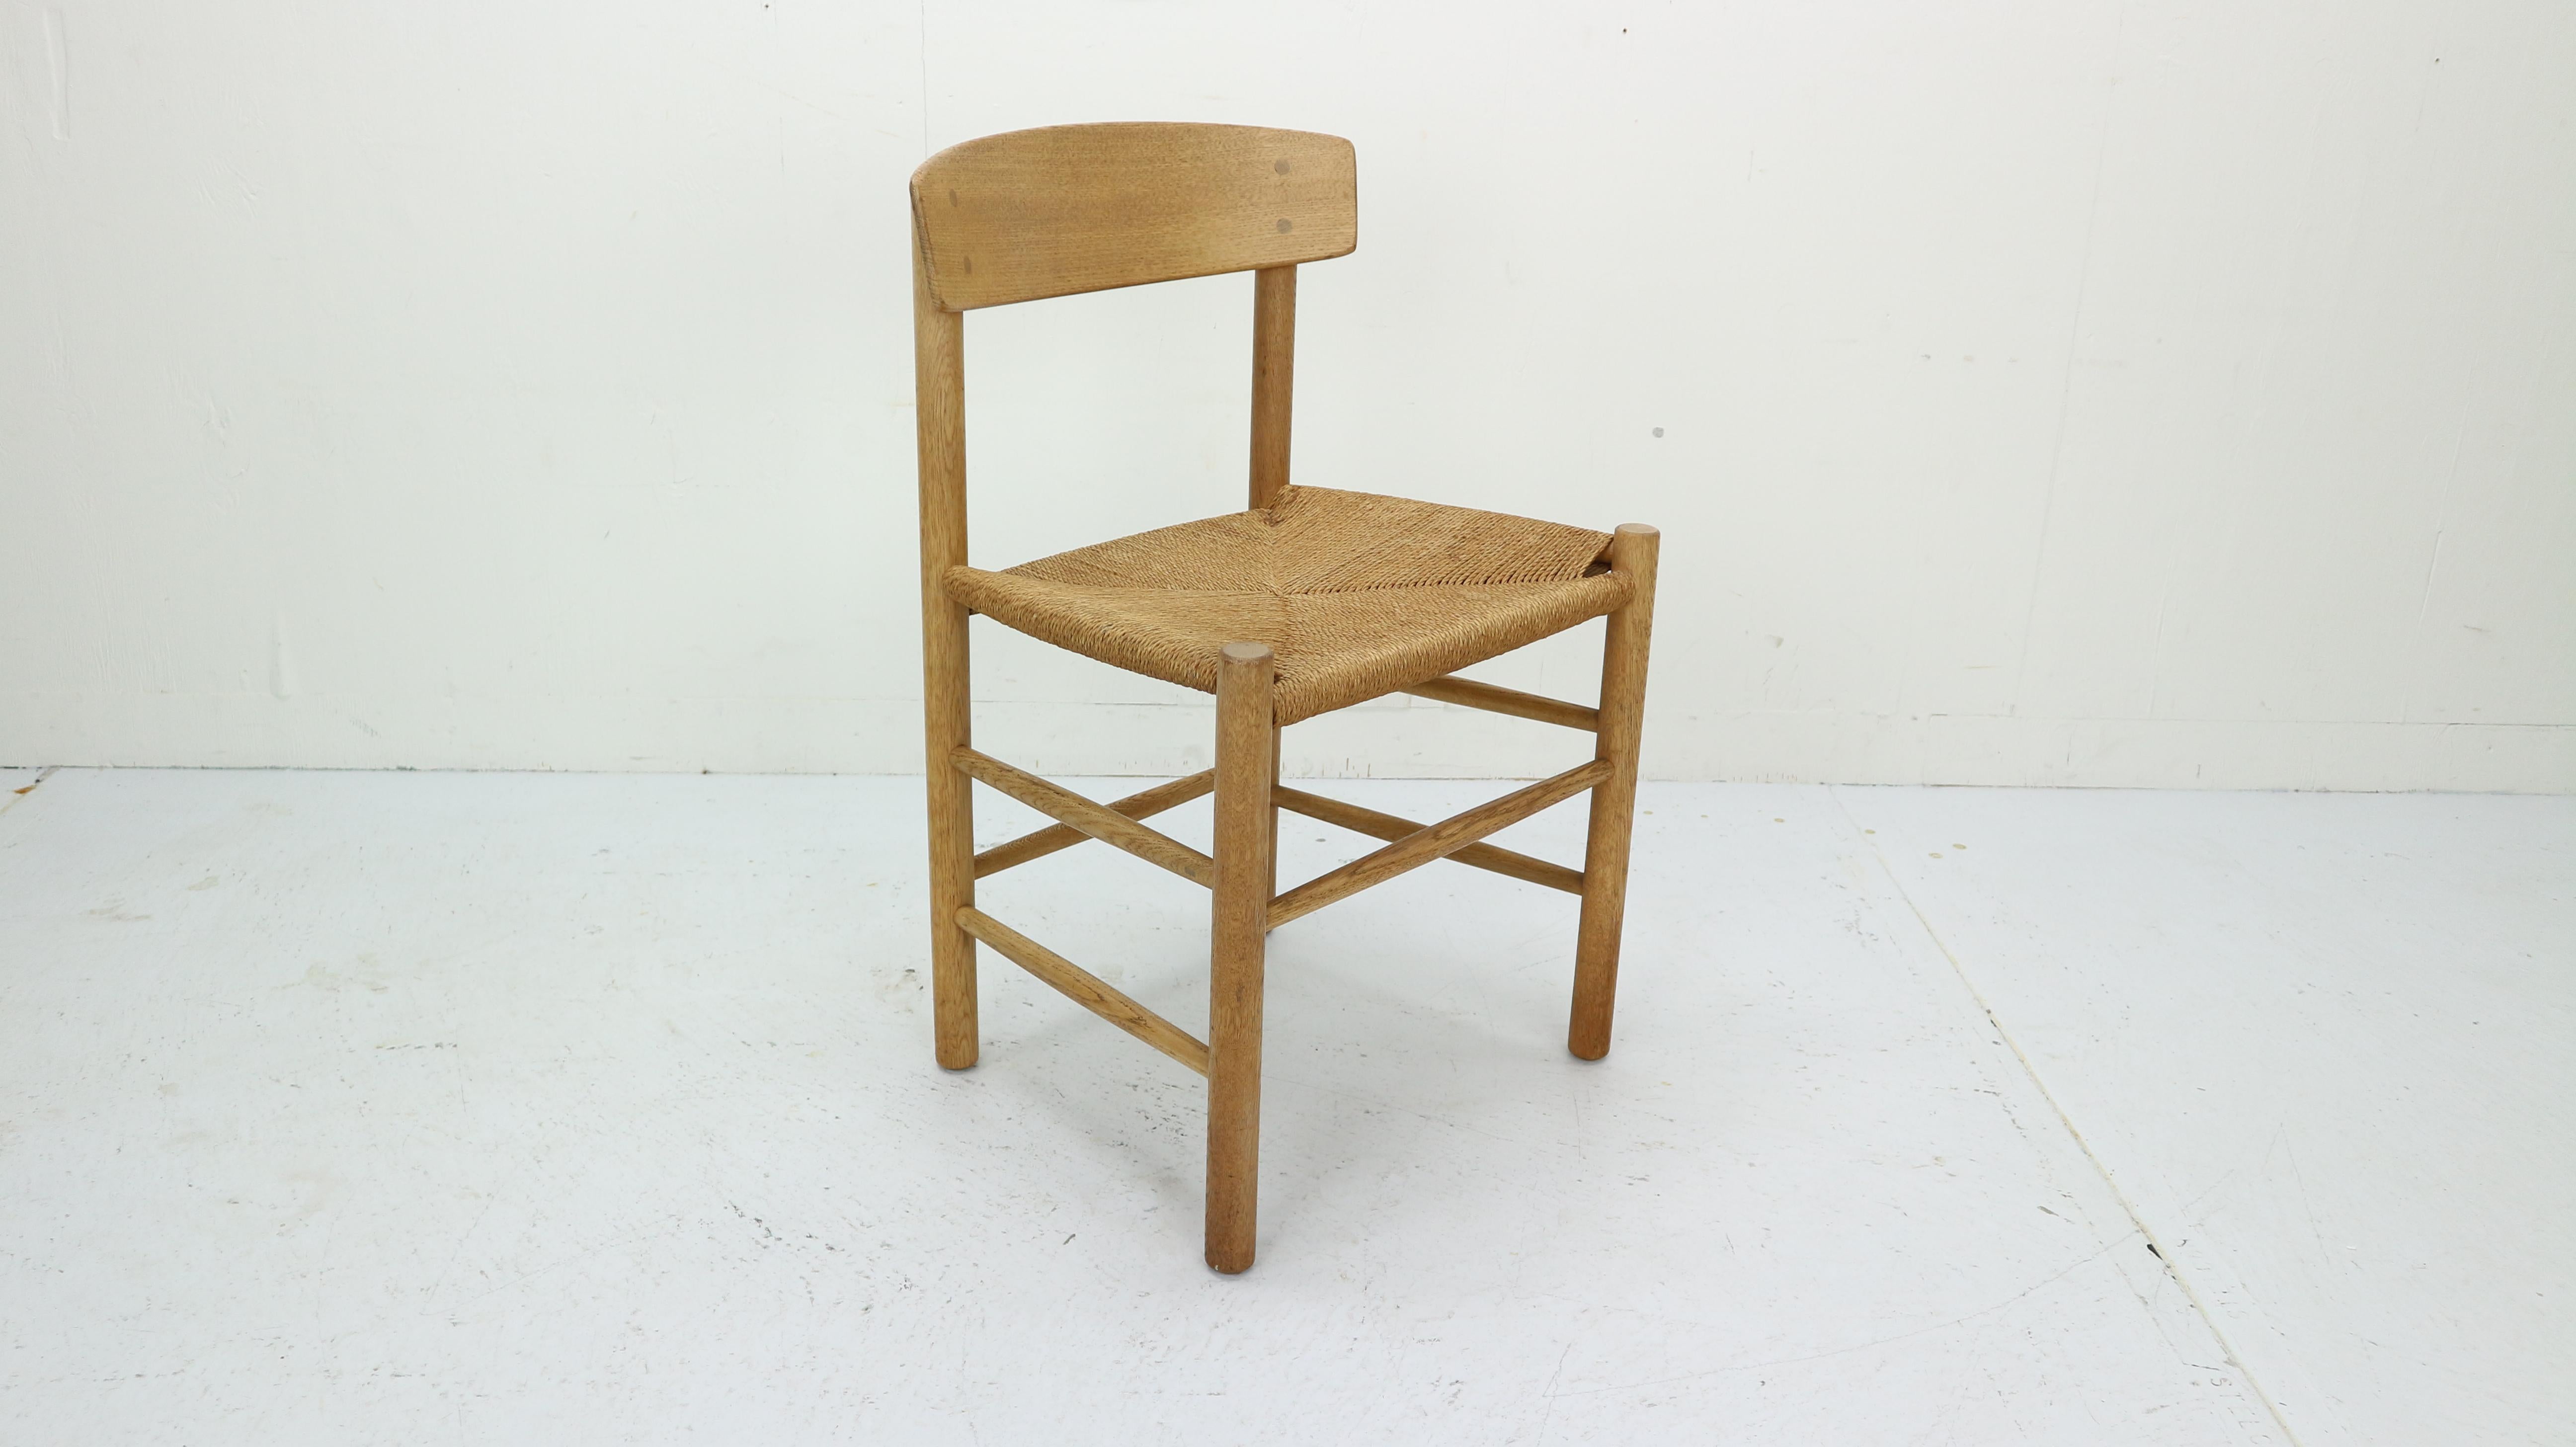 Vintage oak framed dining chair with handwoven original paper cord seat.

A hugely popular and versatile chair which gained the nickname ' The peoples chair'

The chair all has the original hand-woven paper cord seats and is without damage and